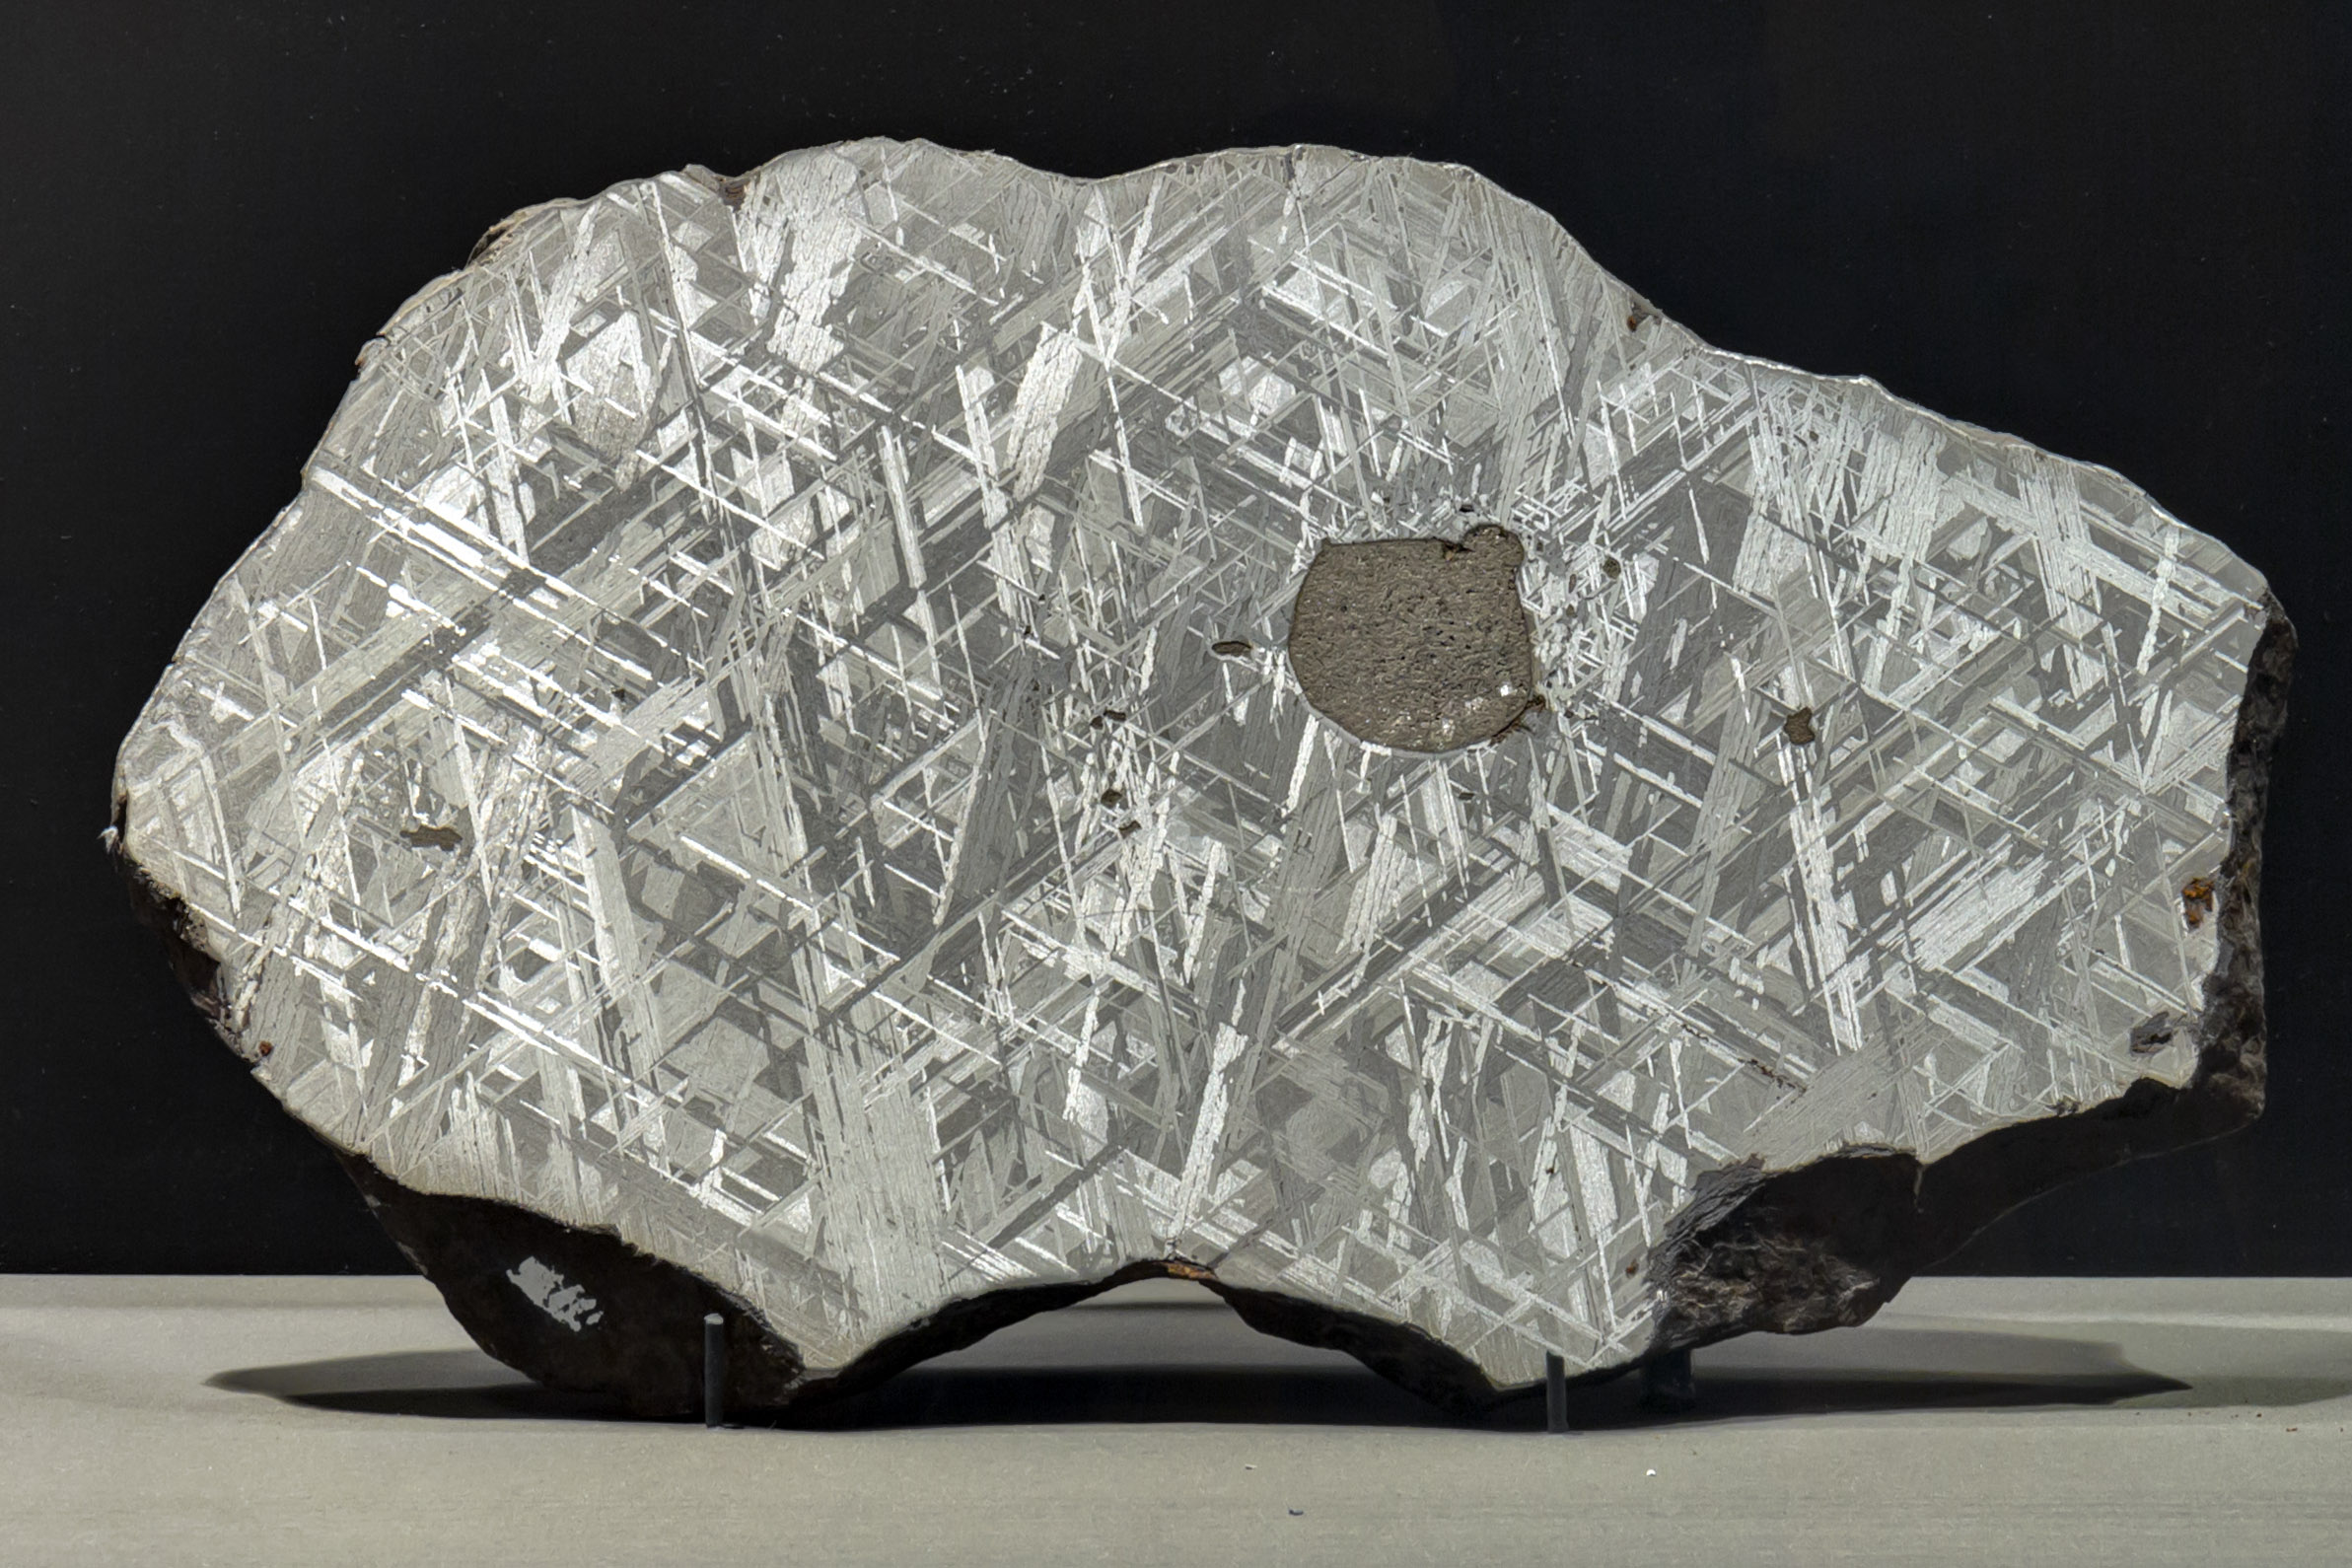 Chemically-etched cross section of an iron-nickel meteorite.